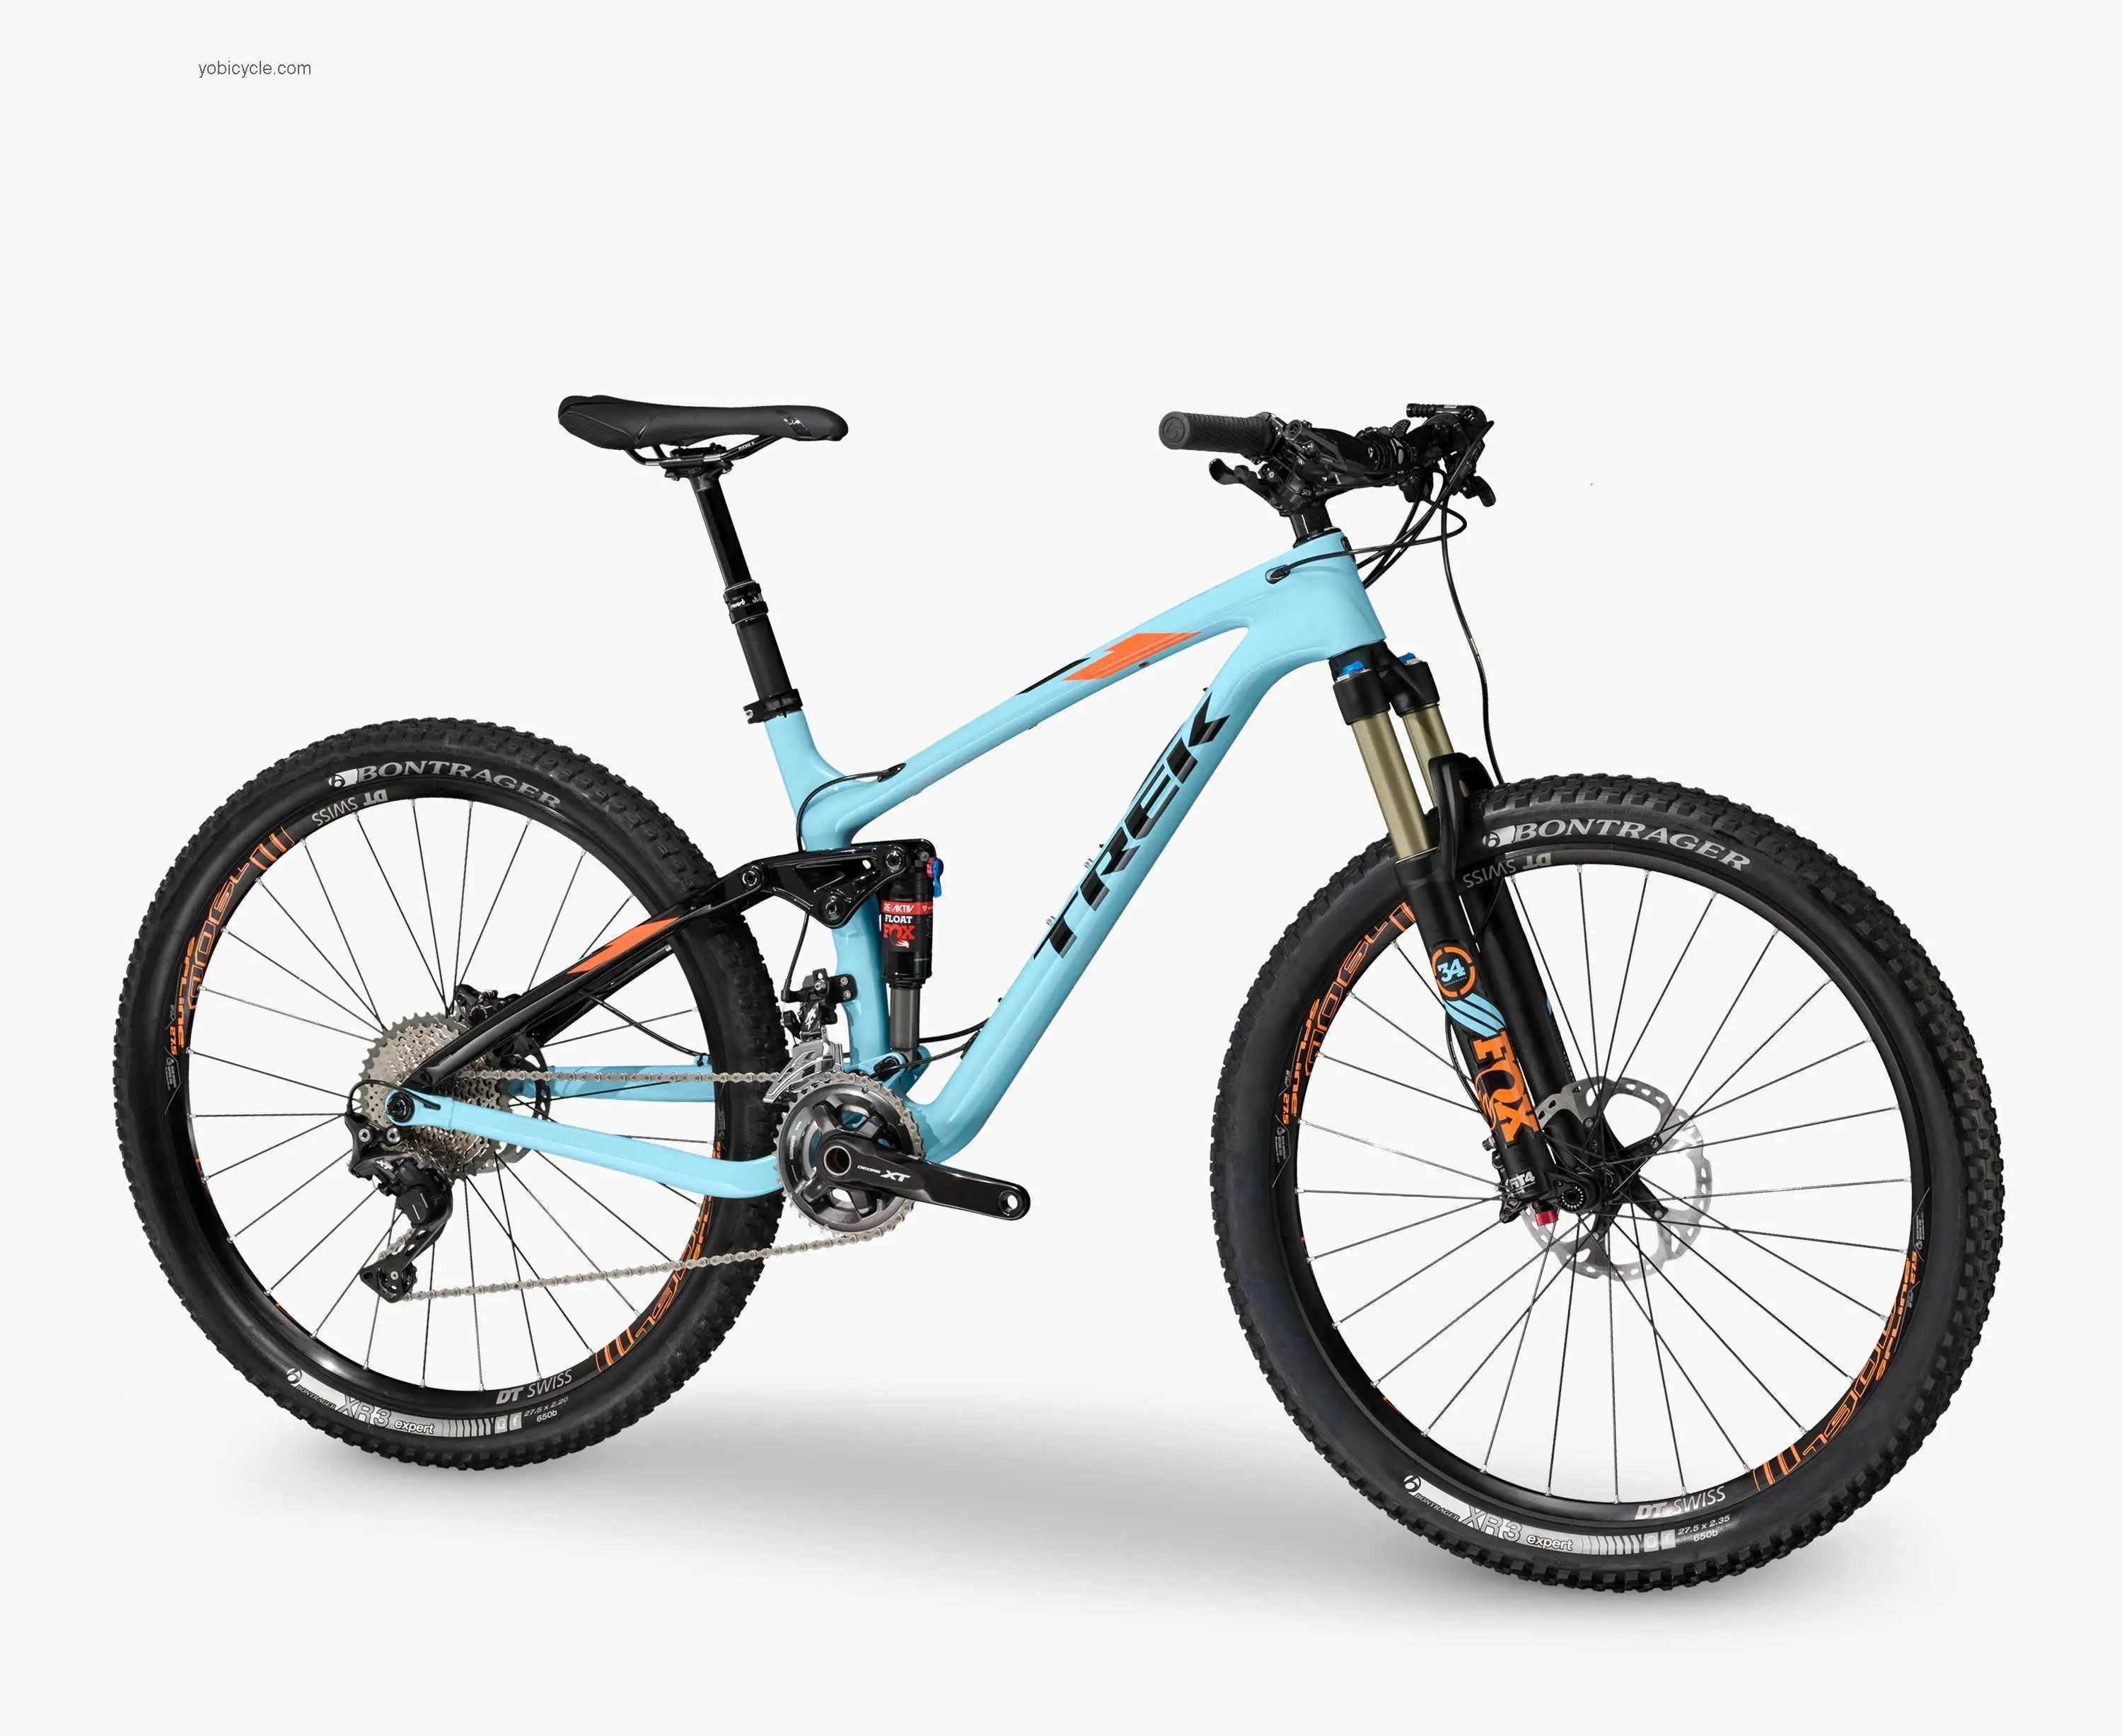 Trek Fuel EX 9.8 27.5 competitors and comparison tool online specs and performance